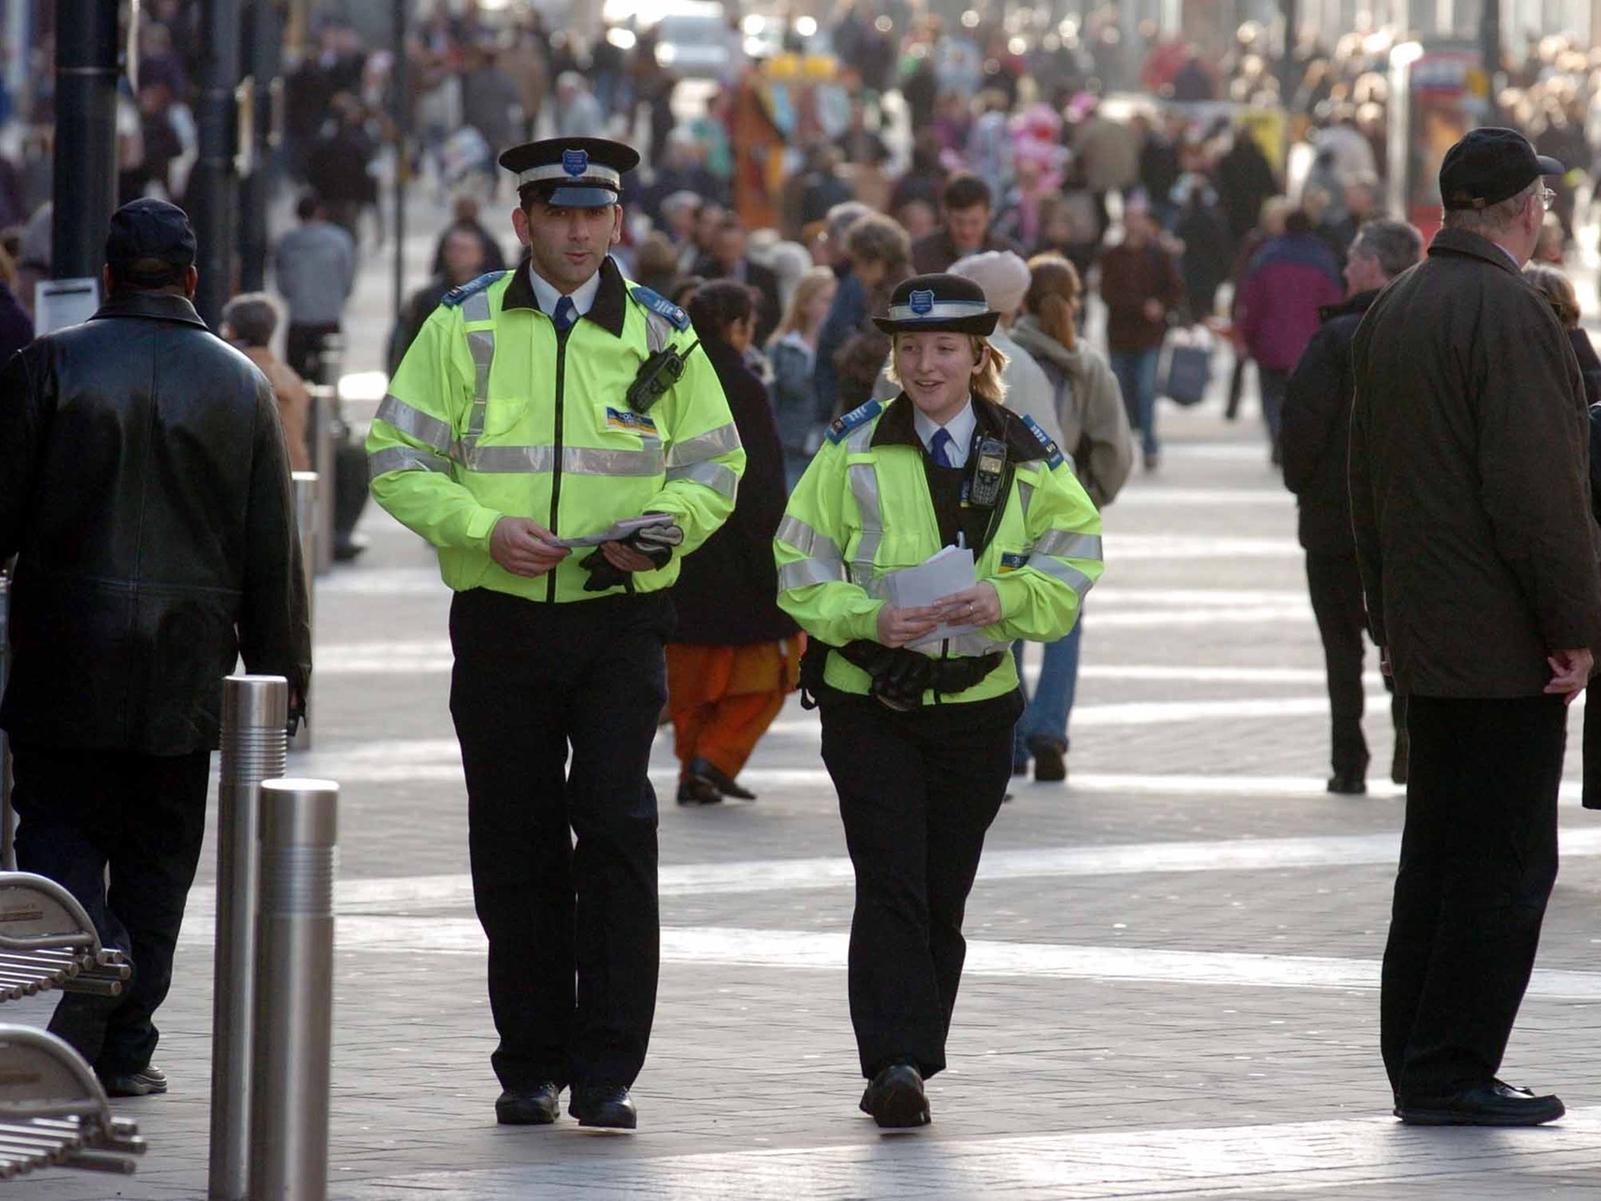 There were 8 drugs offences recorded on or near Briggate between November 1 and December 2019